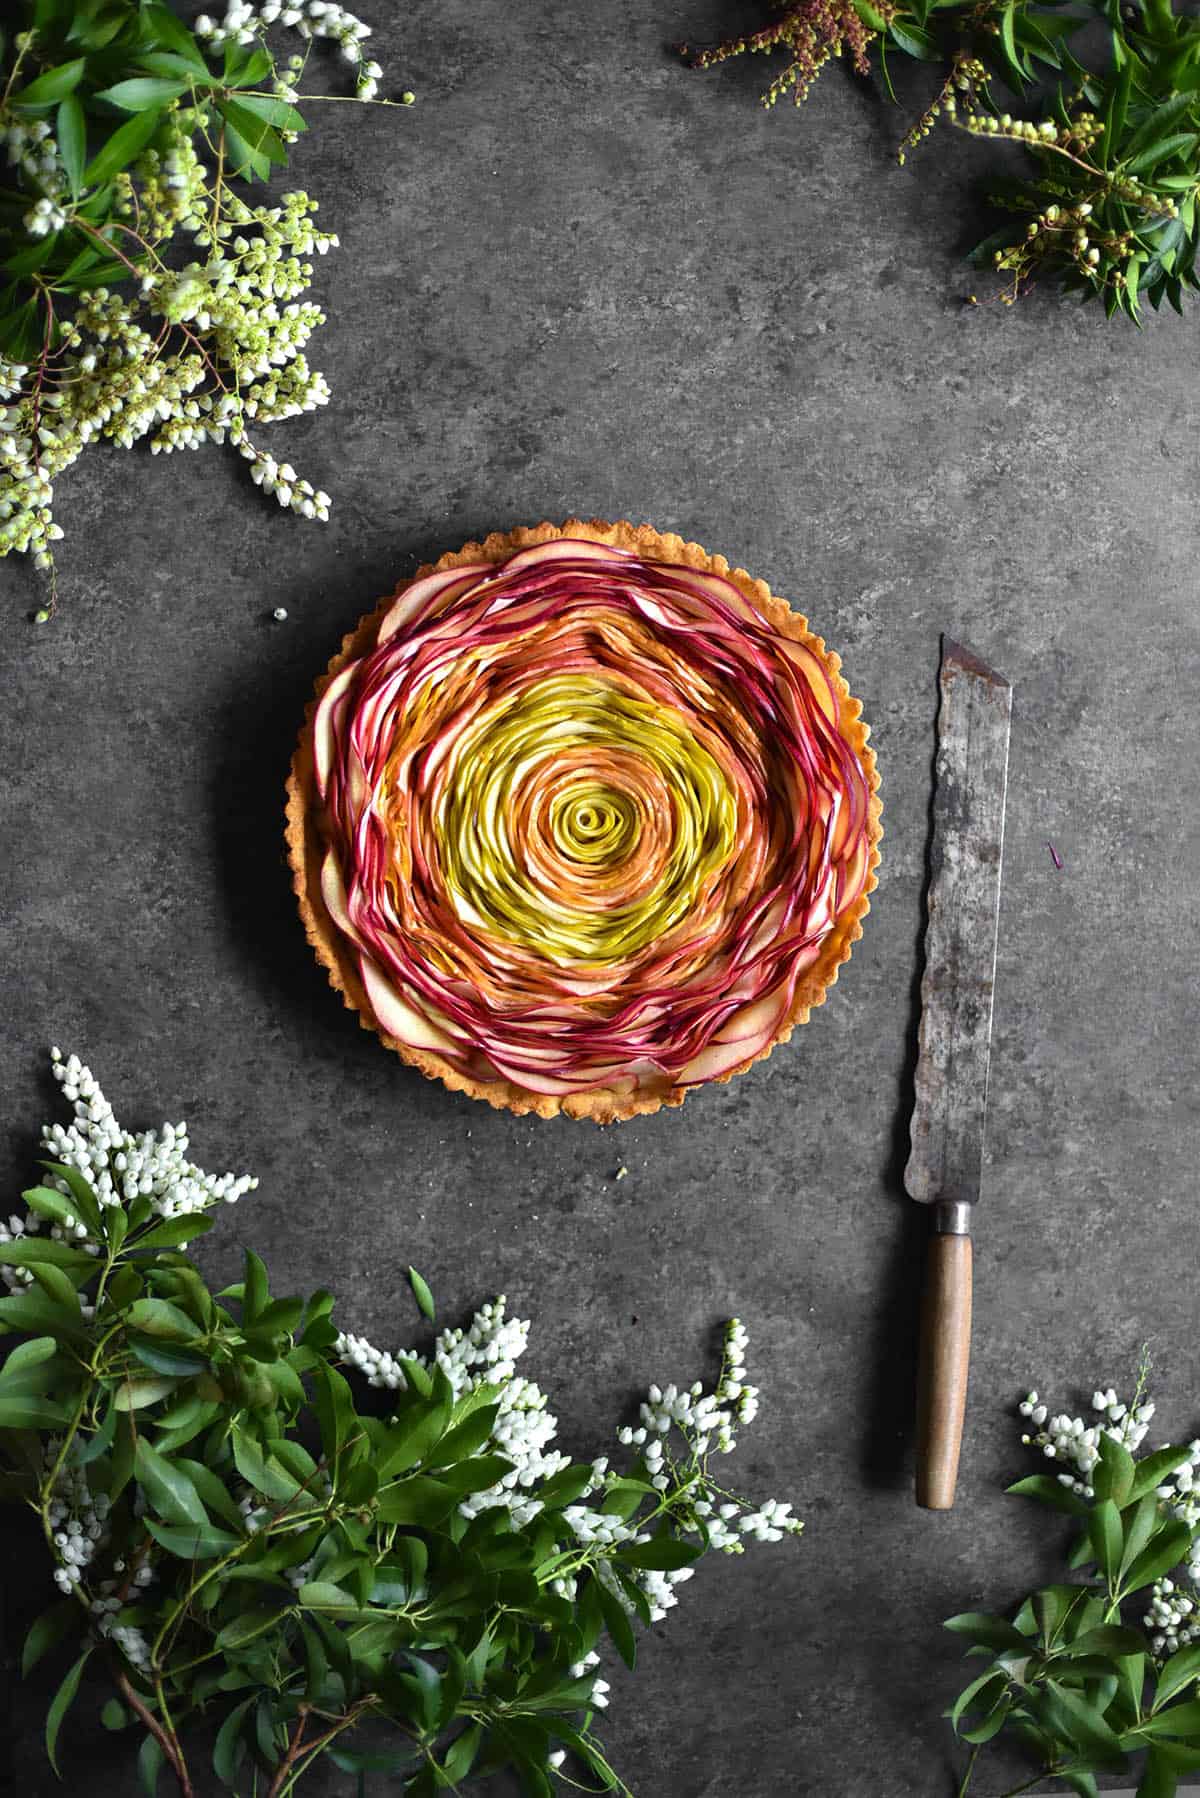 An aerial image of a swirled apple tart on a mottled grey backdrop. The tart is surrounded by floral greenery and sat next to a vintage knife. 